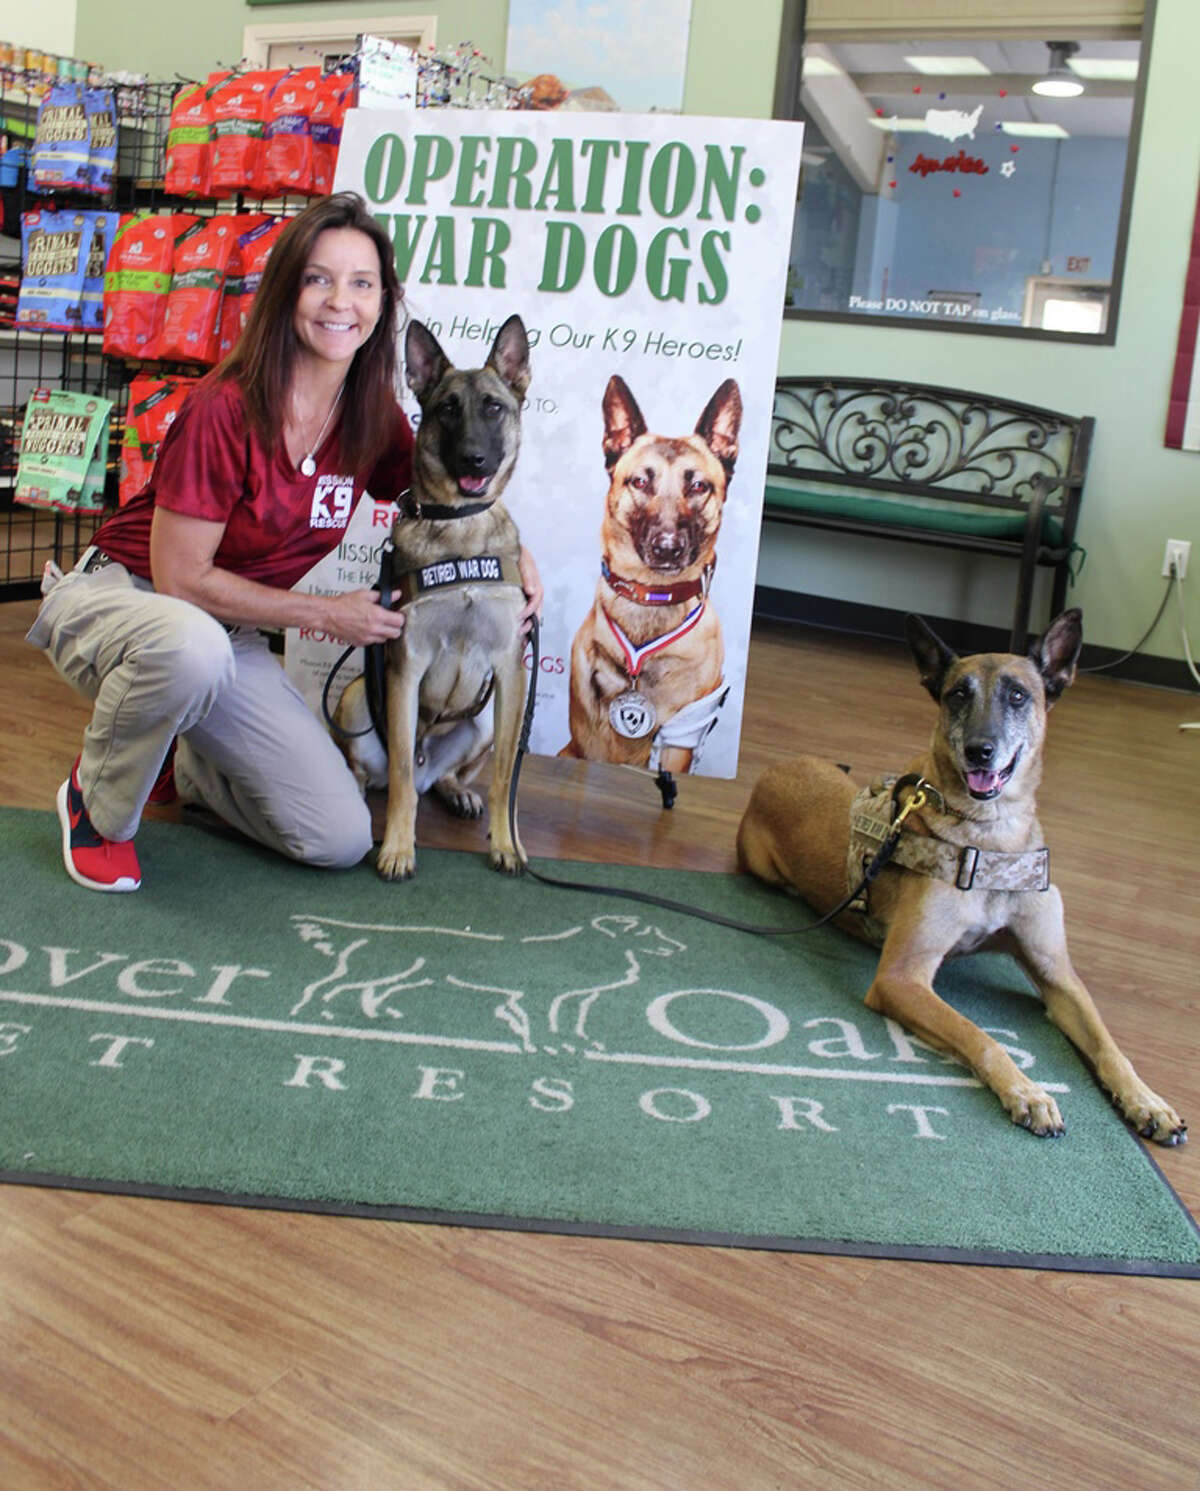 Kristen Maurer, founder and president of Mission K9 Rescue with retired war dogs Gina and Kilo visting Rover Oaks Pet Resort.